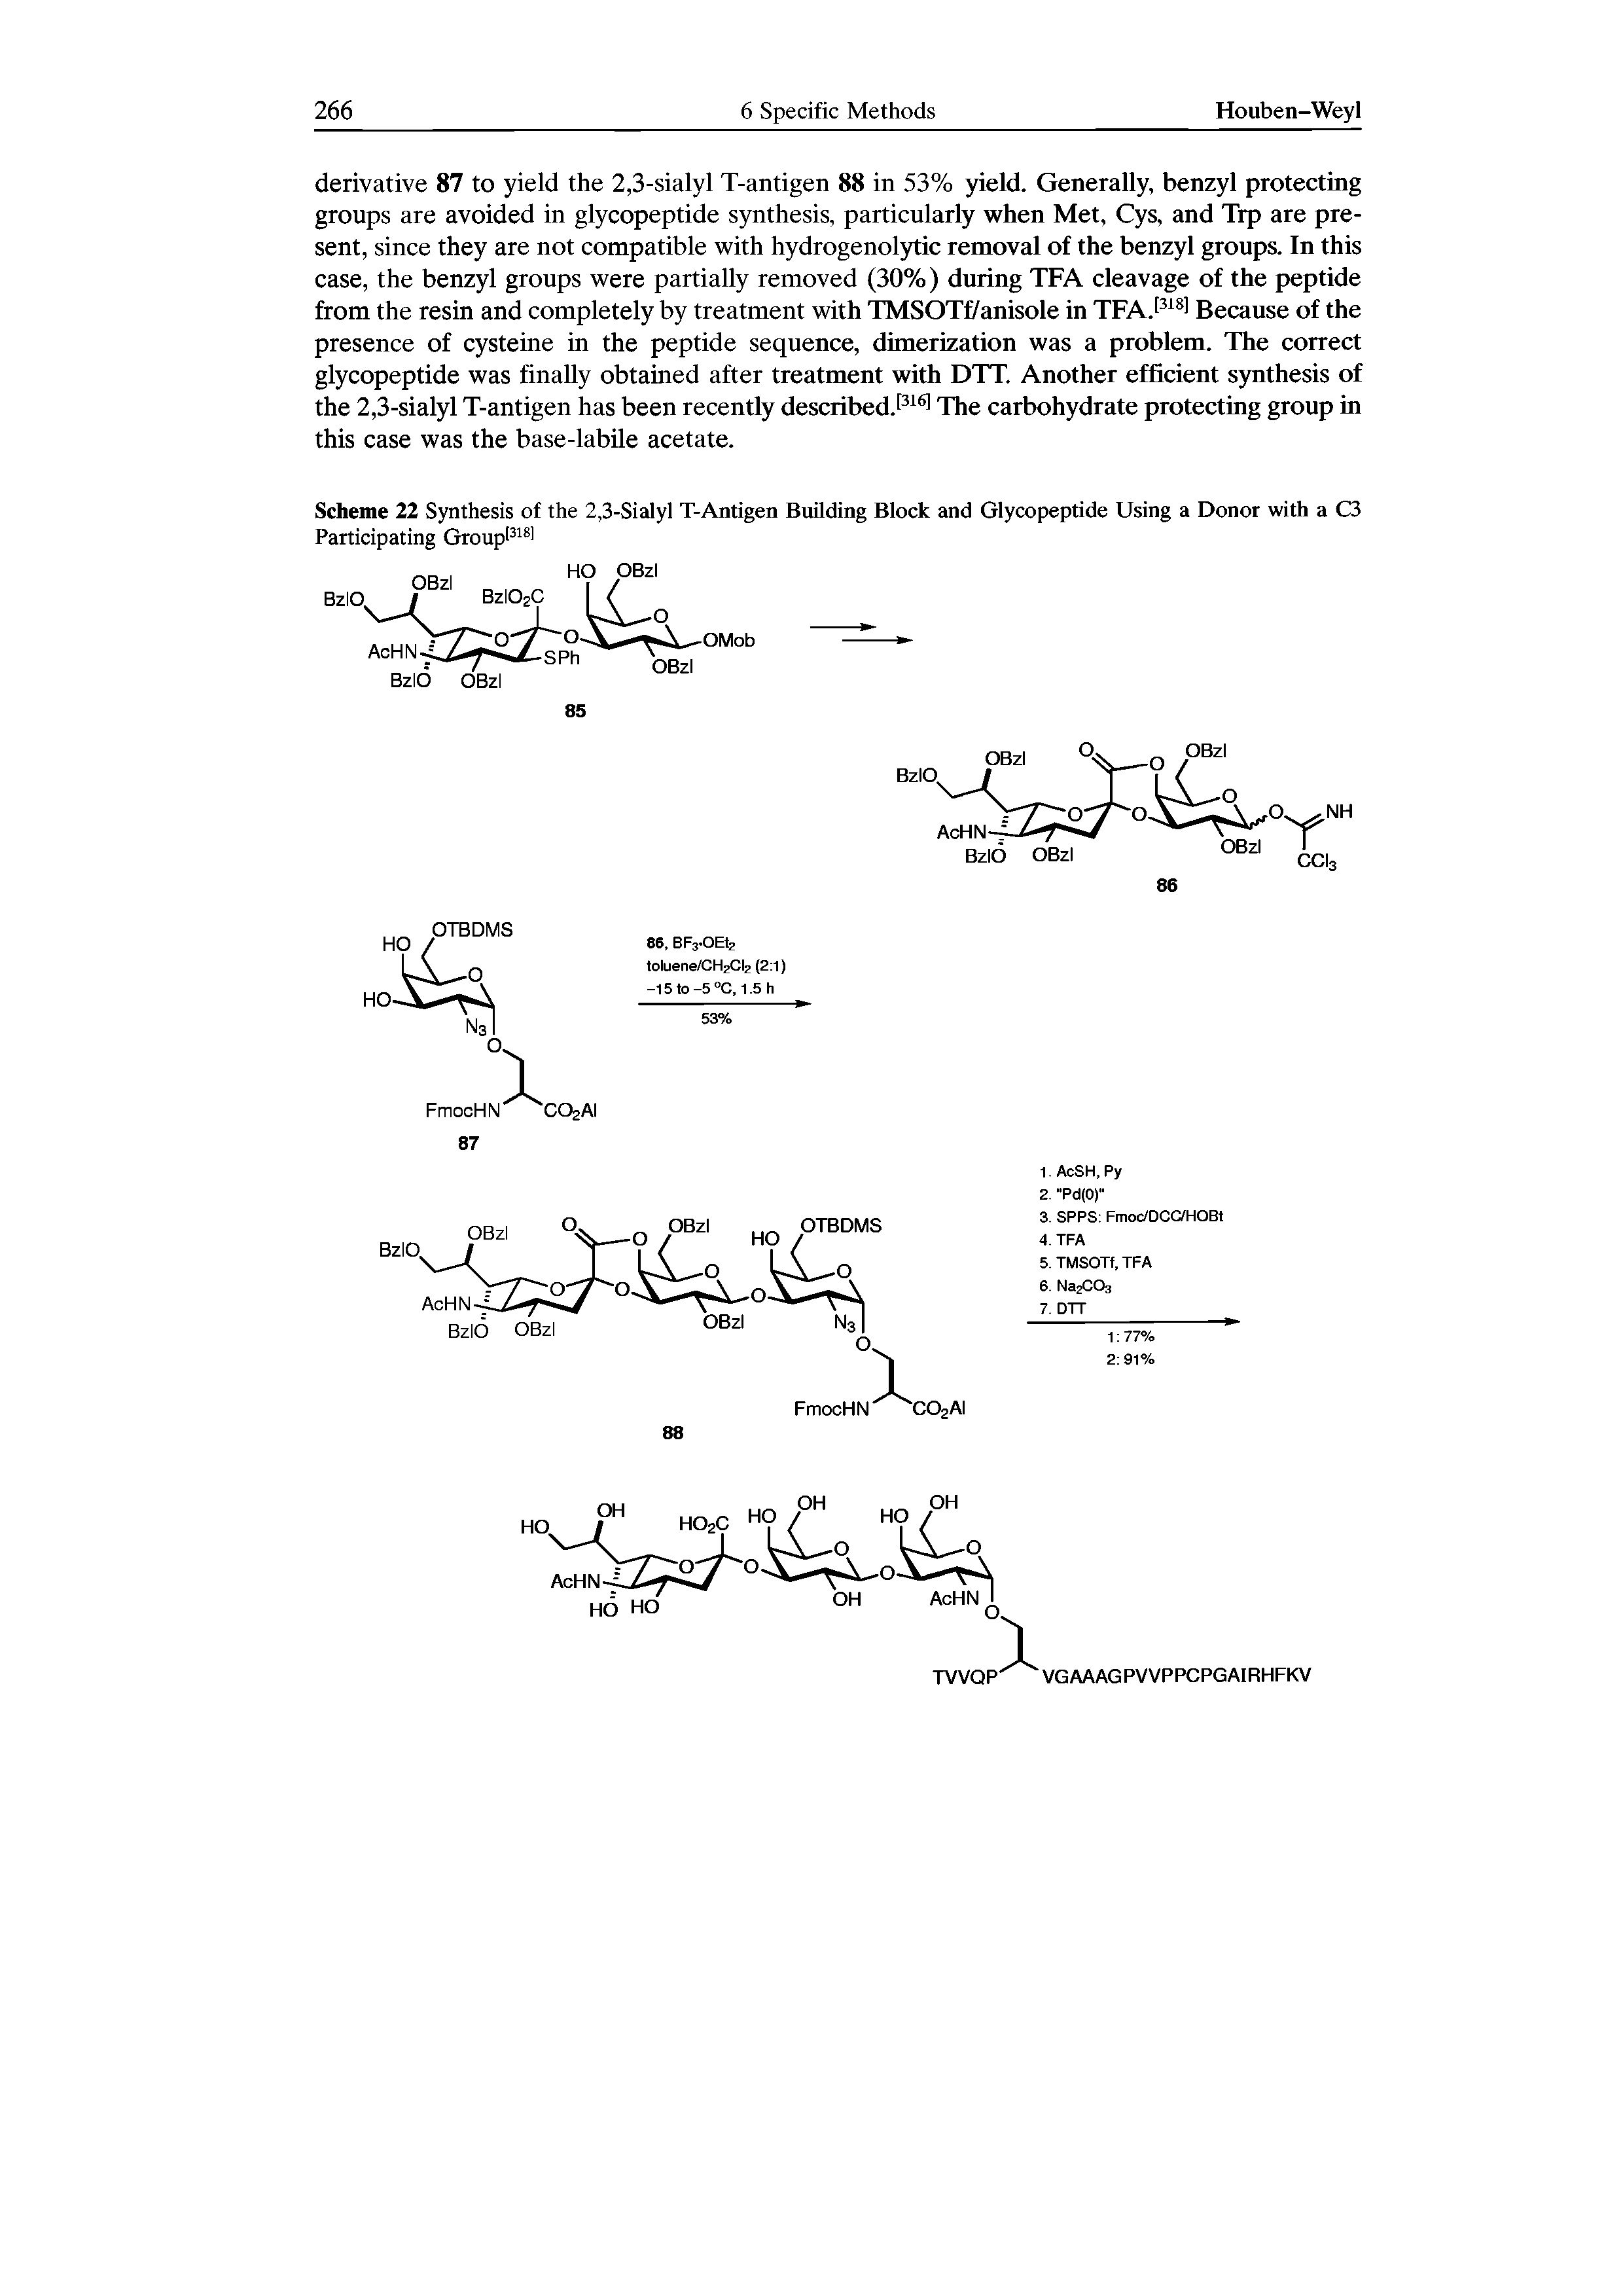 Scheme 22 Synthesis of the 2,3-Sialyl T-Antigen Building Block and Glycopeptide Using a Donor with a C3 Participating Group 3181...